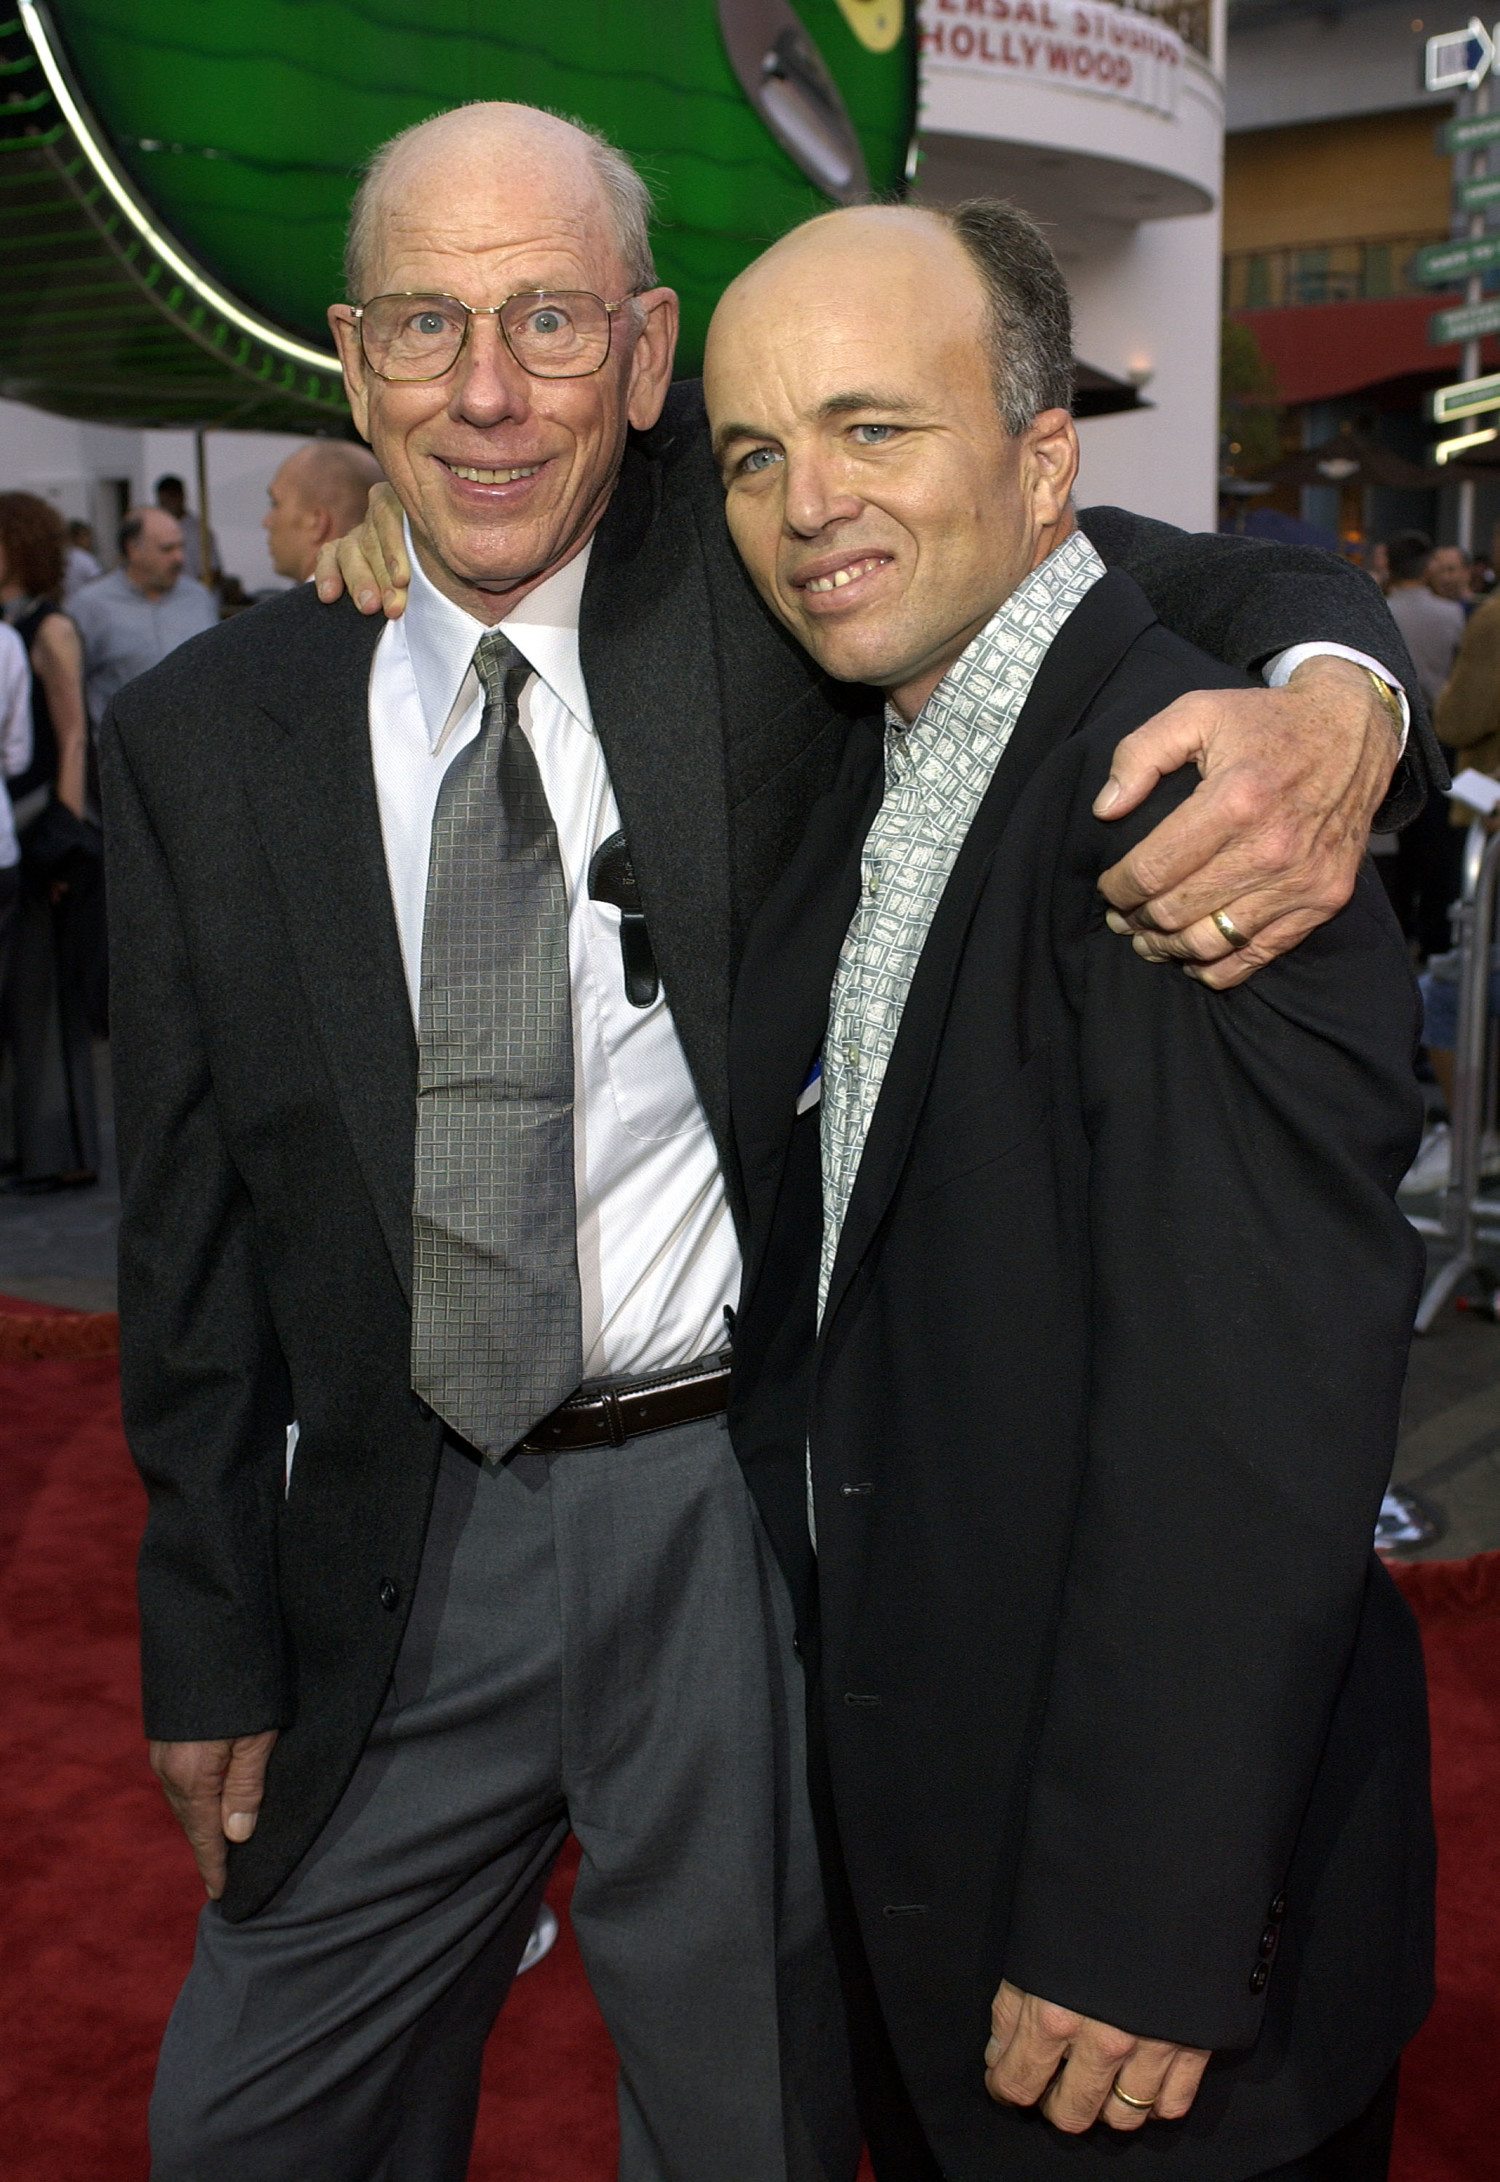 Clint Howard and Father Rance At Premiere of Apollo 13 - The IMAX Experience